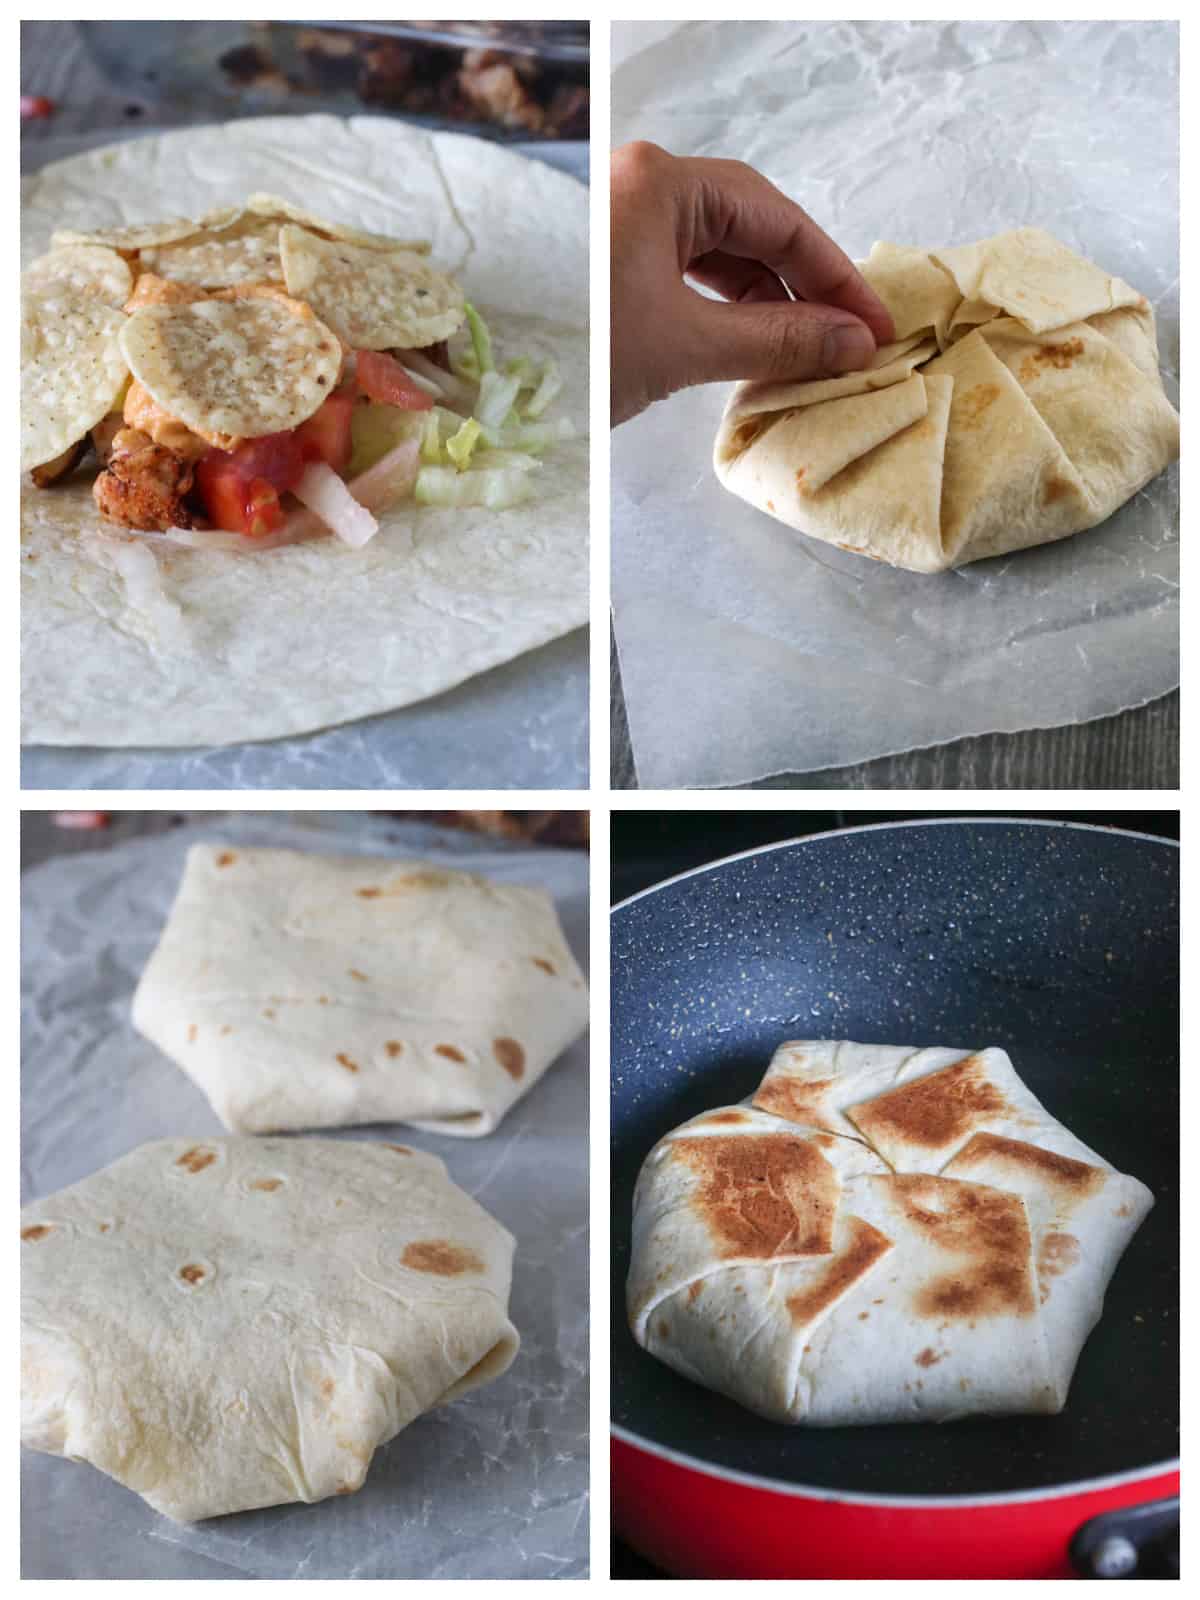 Assembly of the chicken crunch wrap.